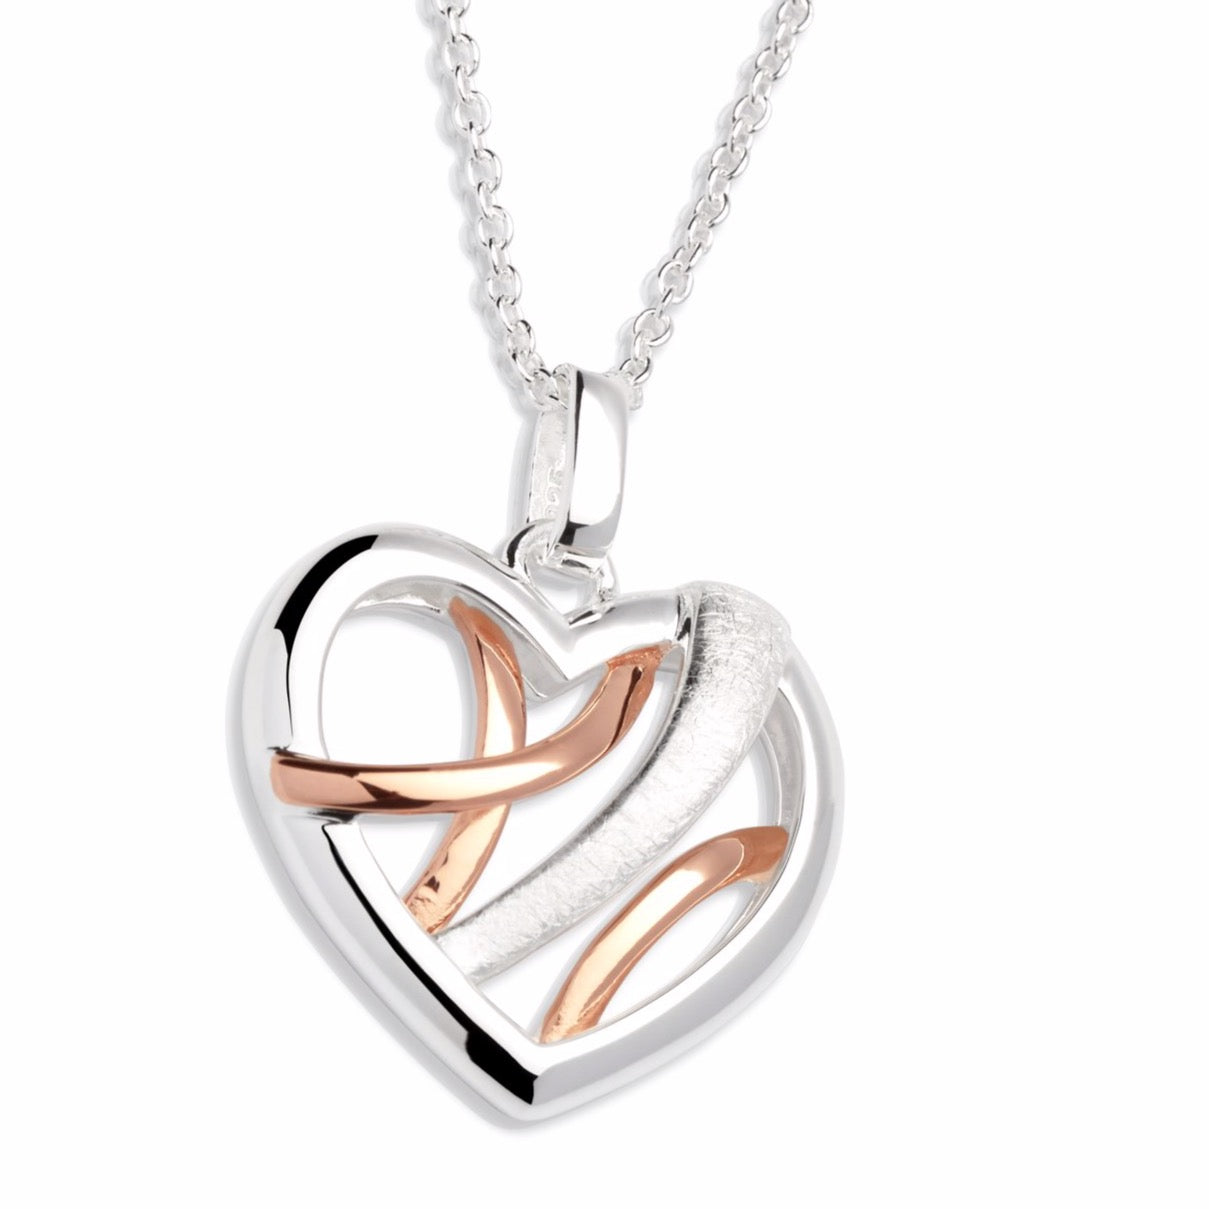 Unique & Co Sterling Silver Heart Pendant With Rose Gold Elements